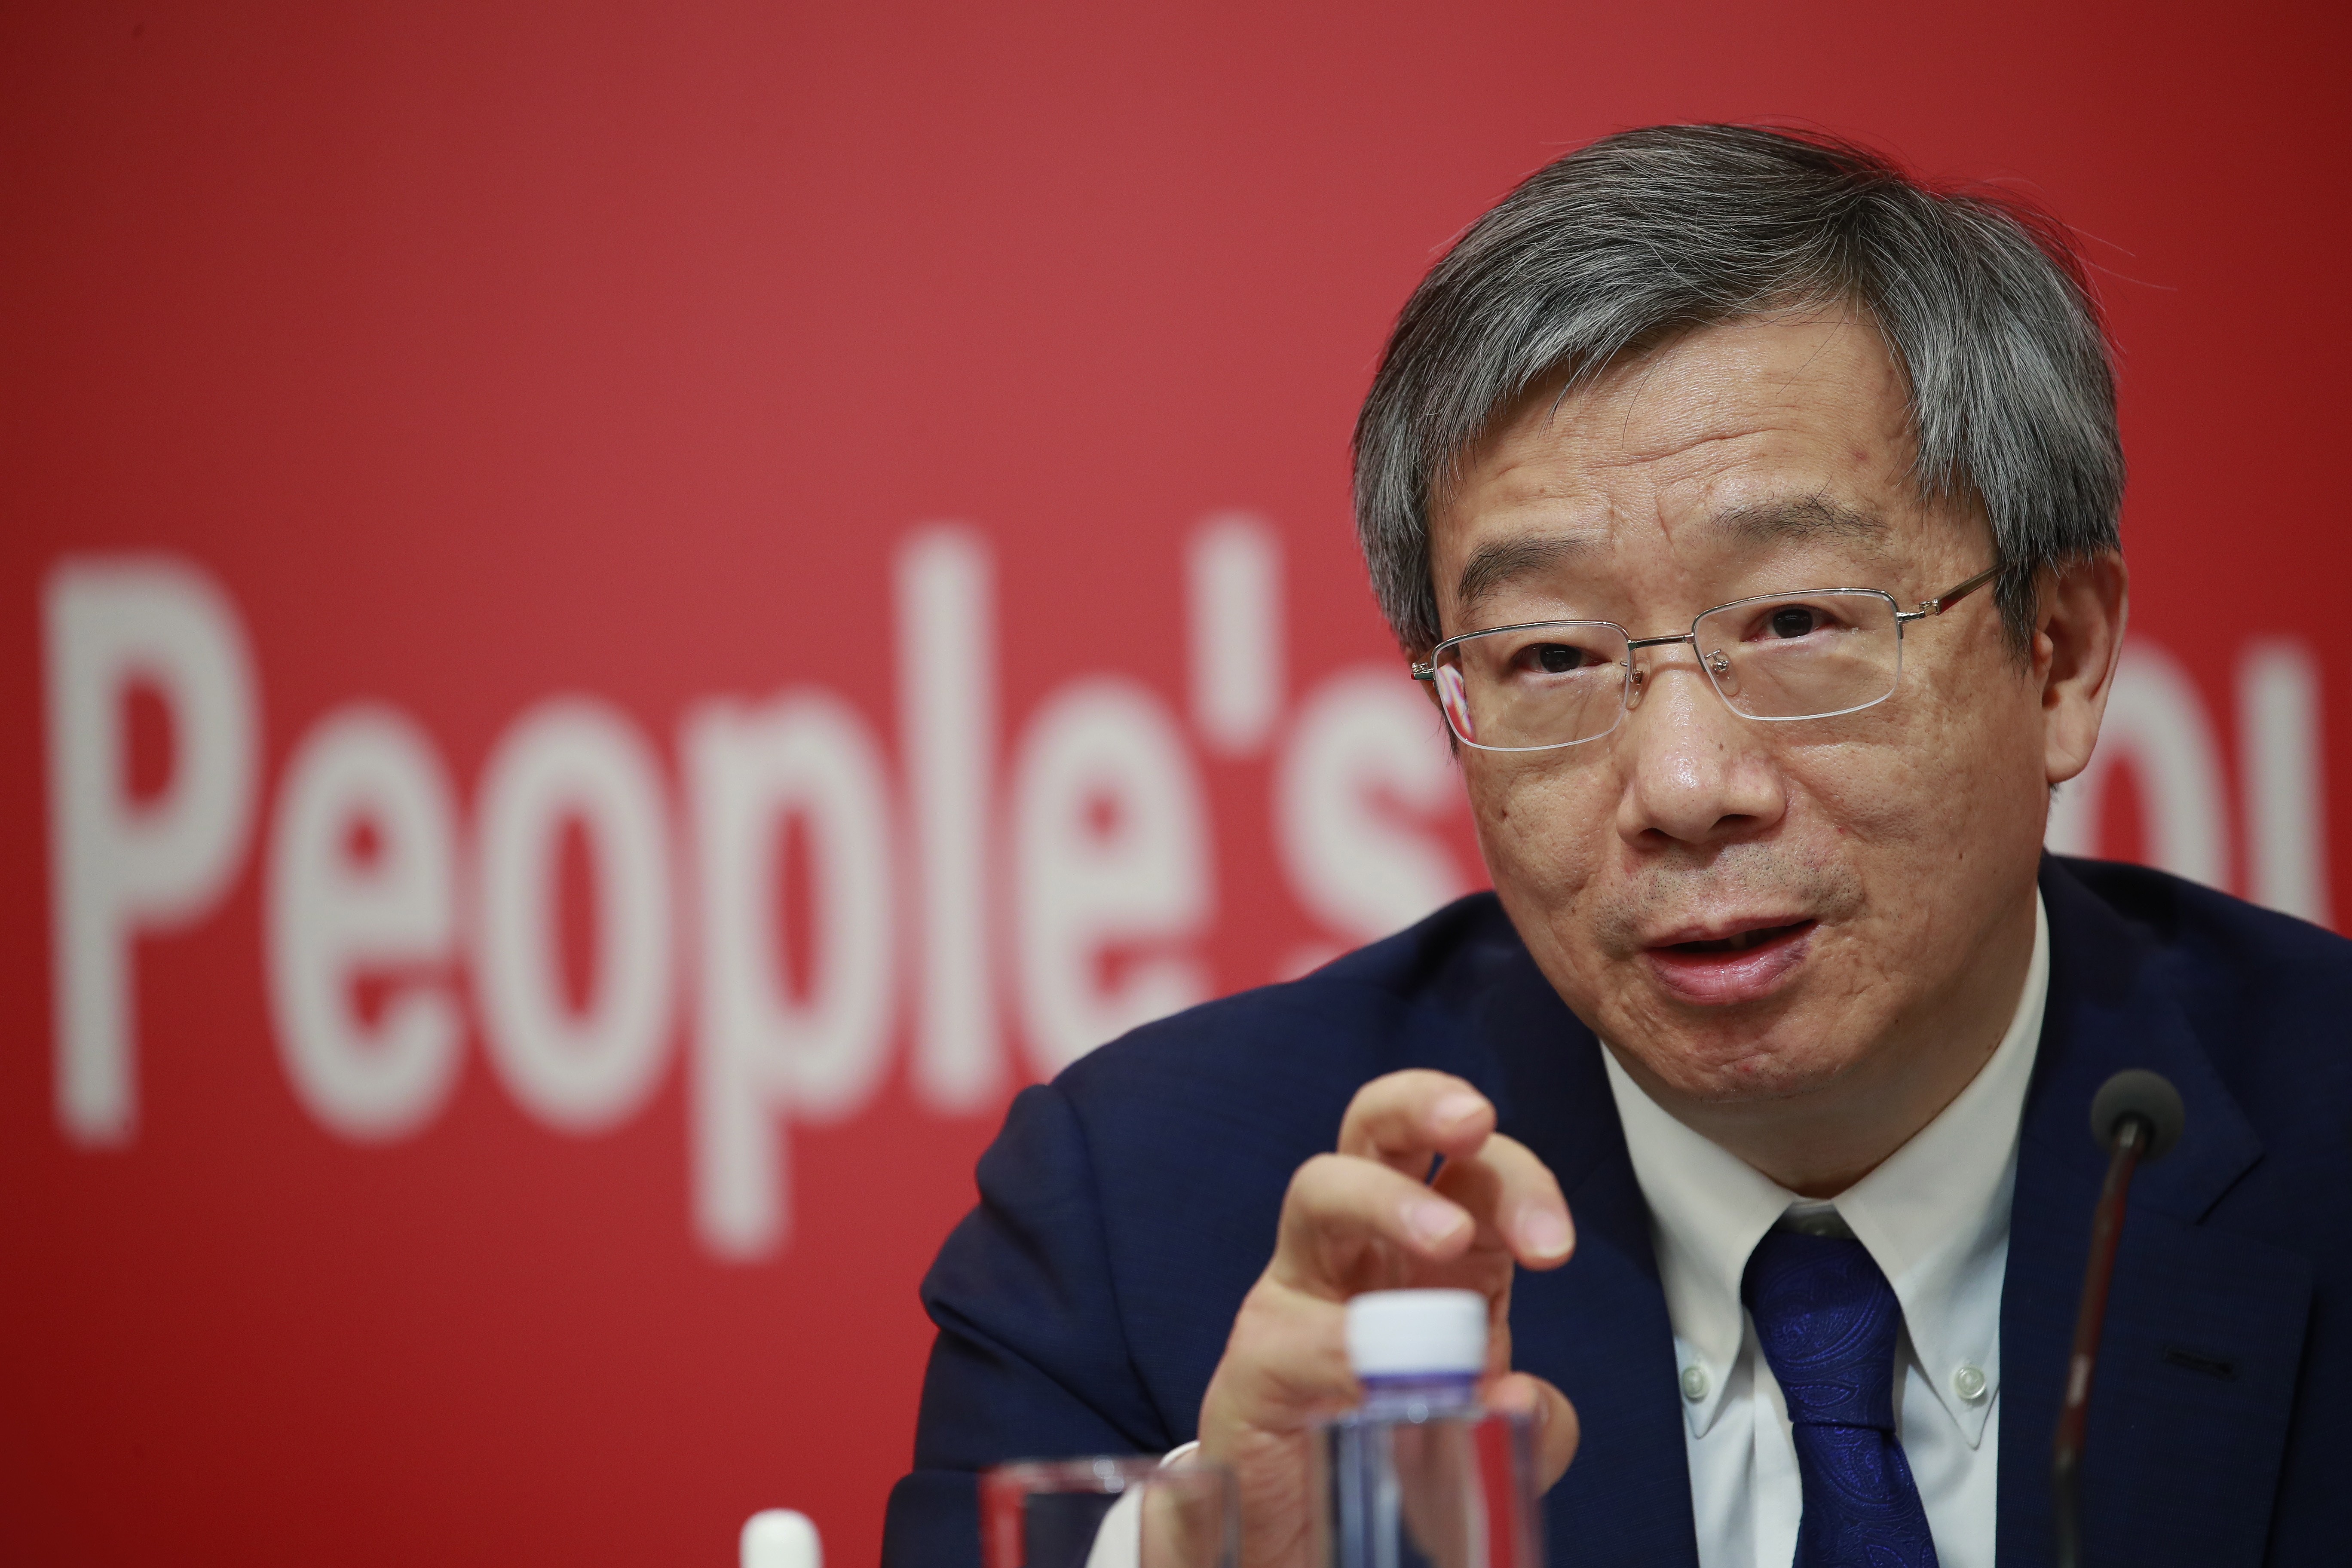 PBOC chief Yi Gang says the central bank will continue to implement a prudent monetary policy. Photo: EPA-EFE